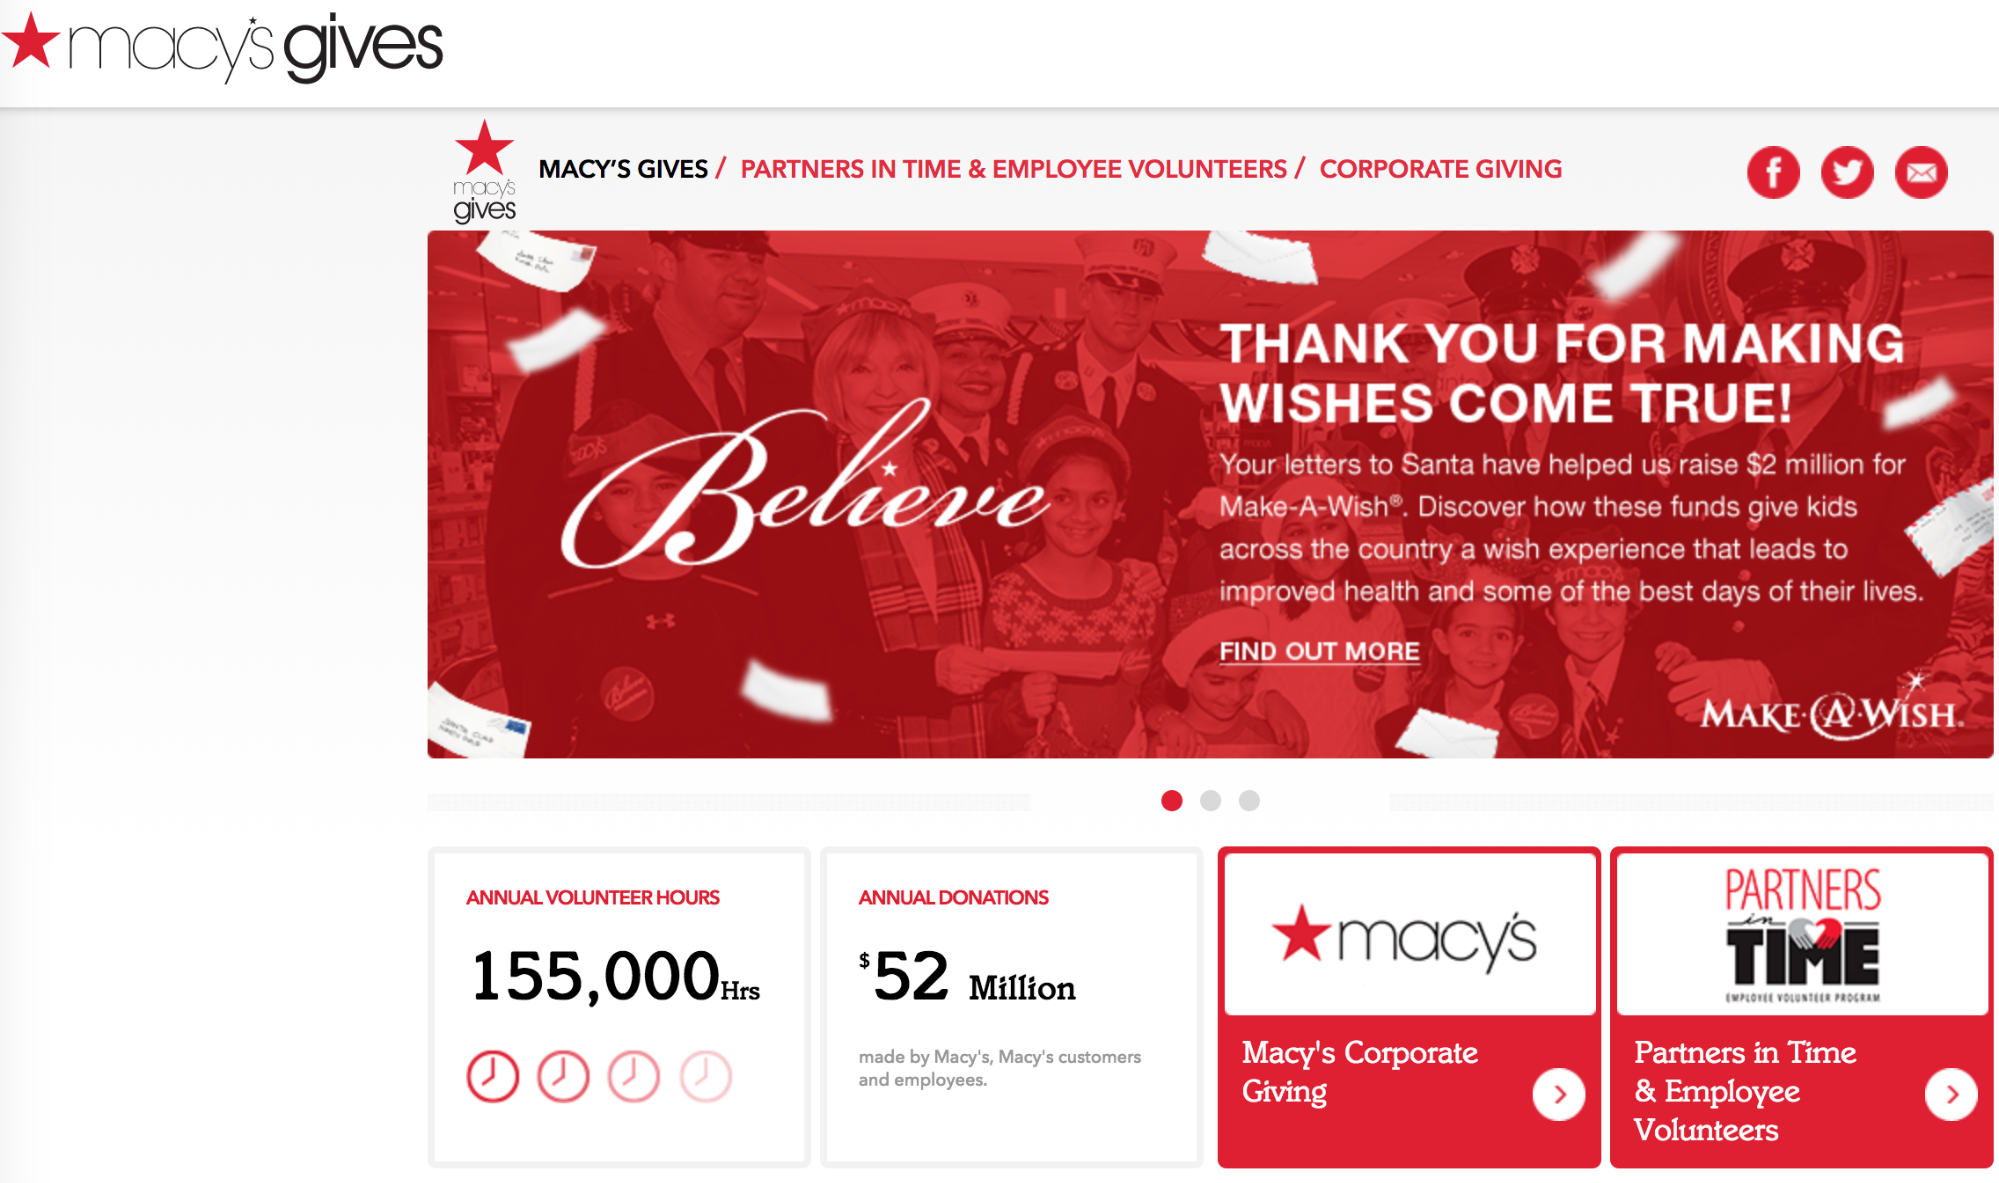 Screenshot showing a charity page on macy